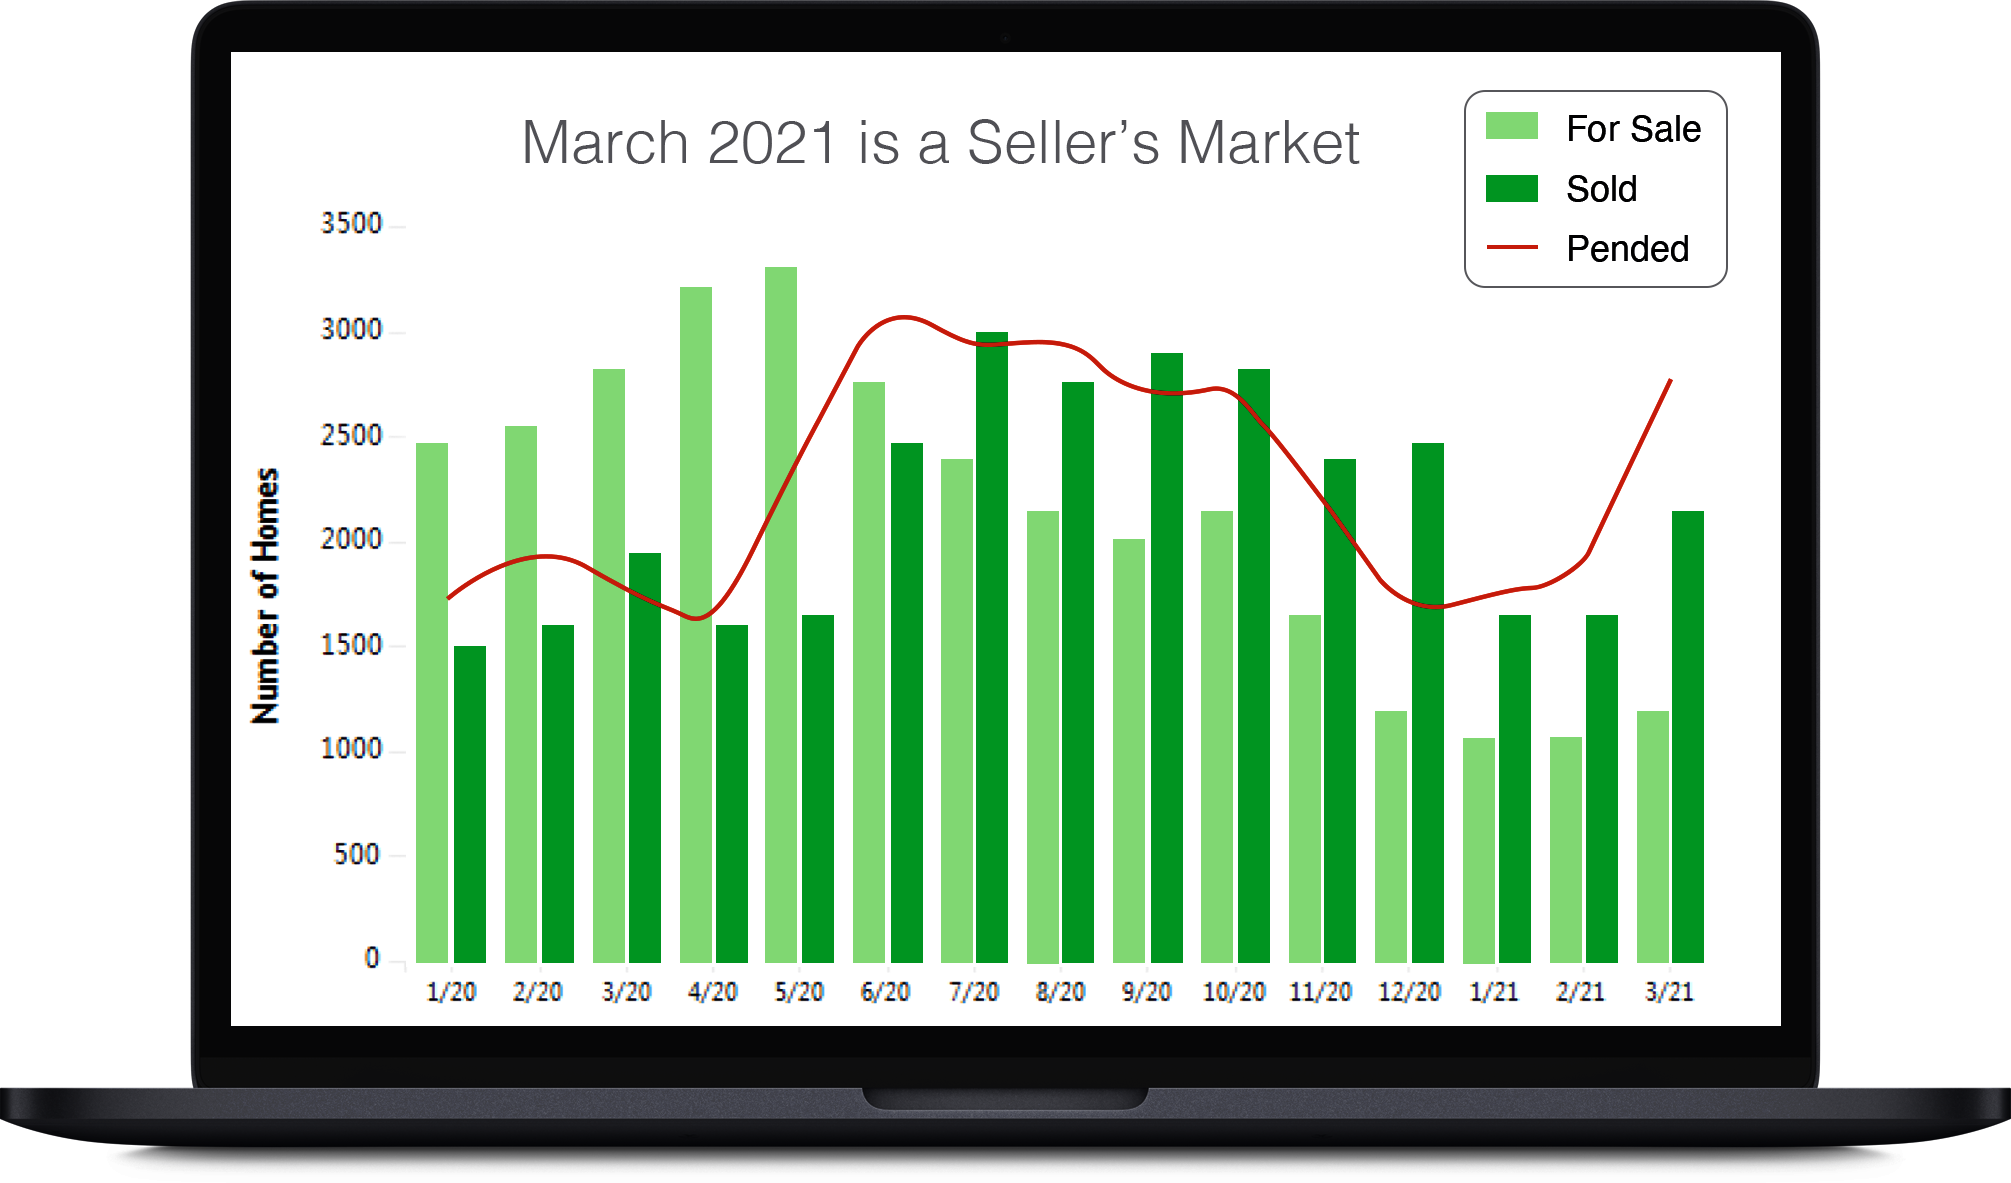 Chart showing March 2021 is a seller's market